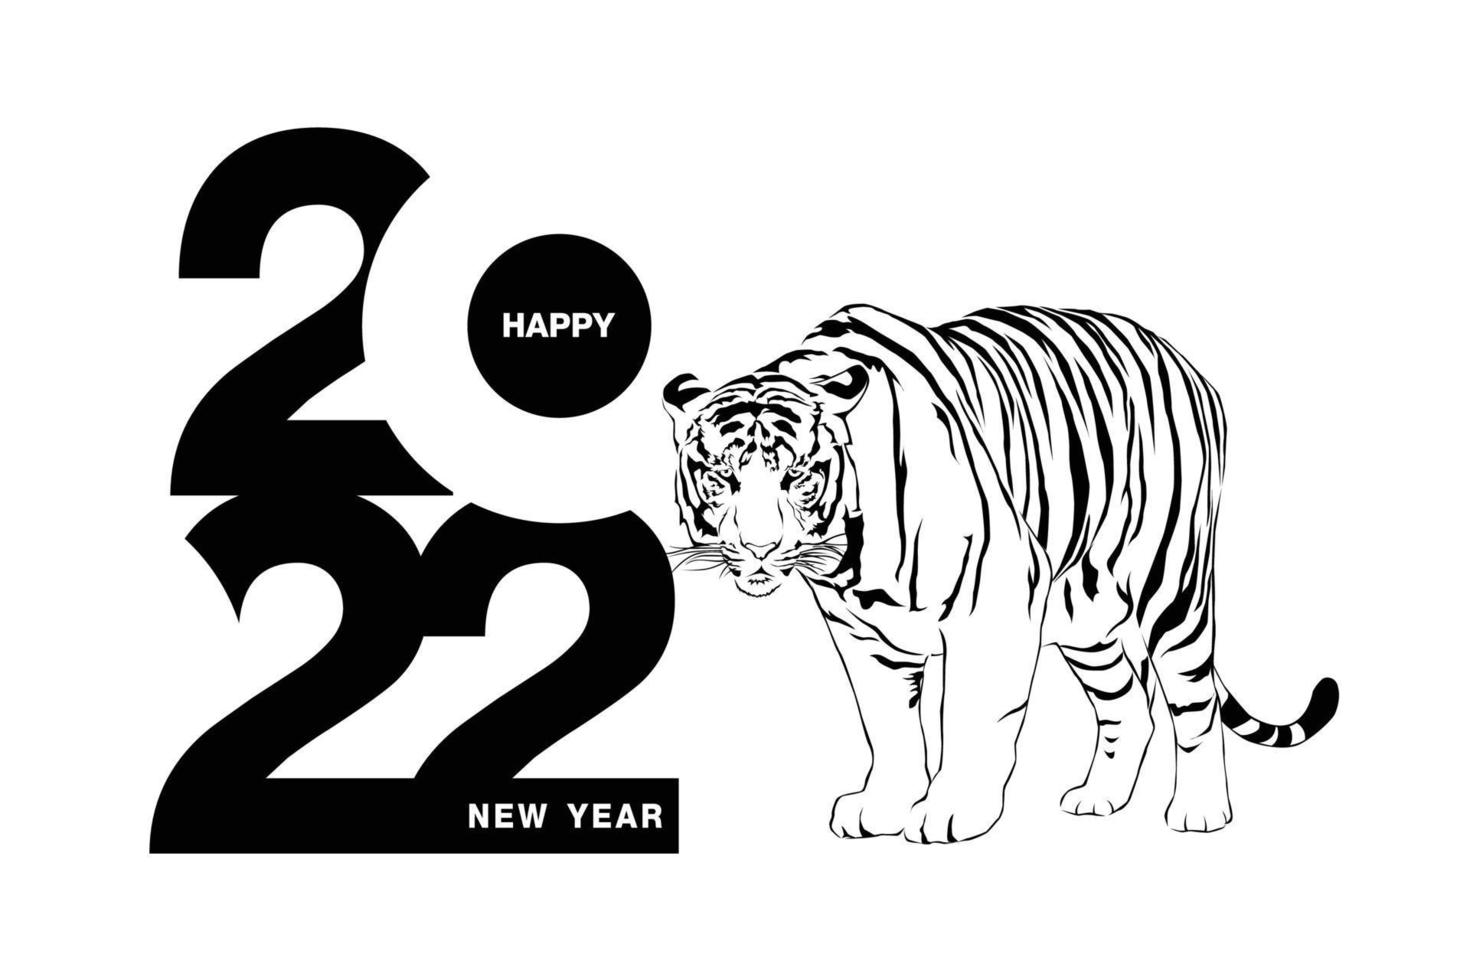 Happy new year 2022 year of the tiger black and white line drawing standing beside numbers 2022 for poster brochure banner invitation card vector illustration isolated on white background.